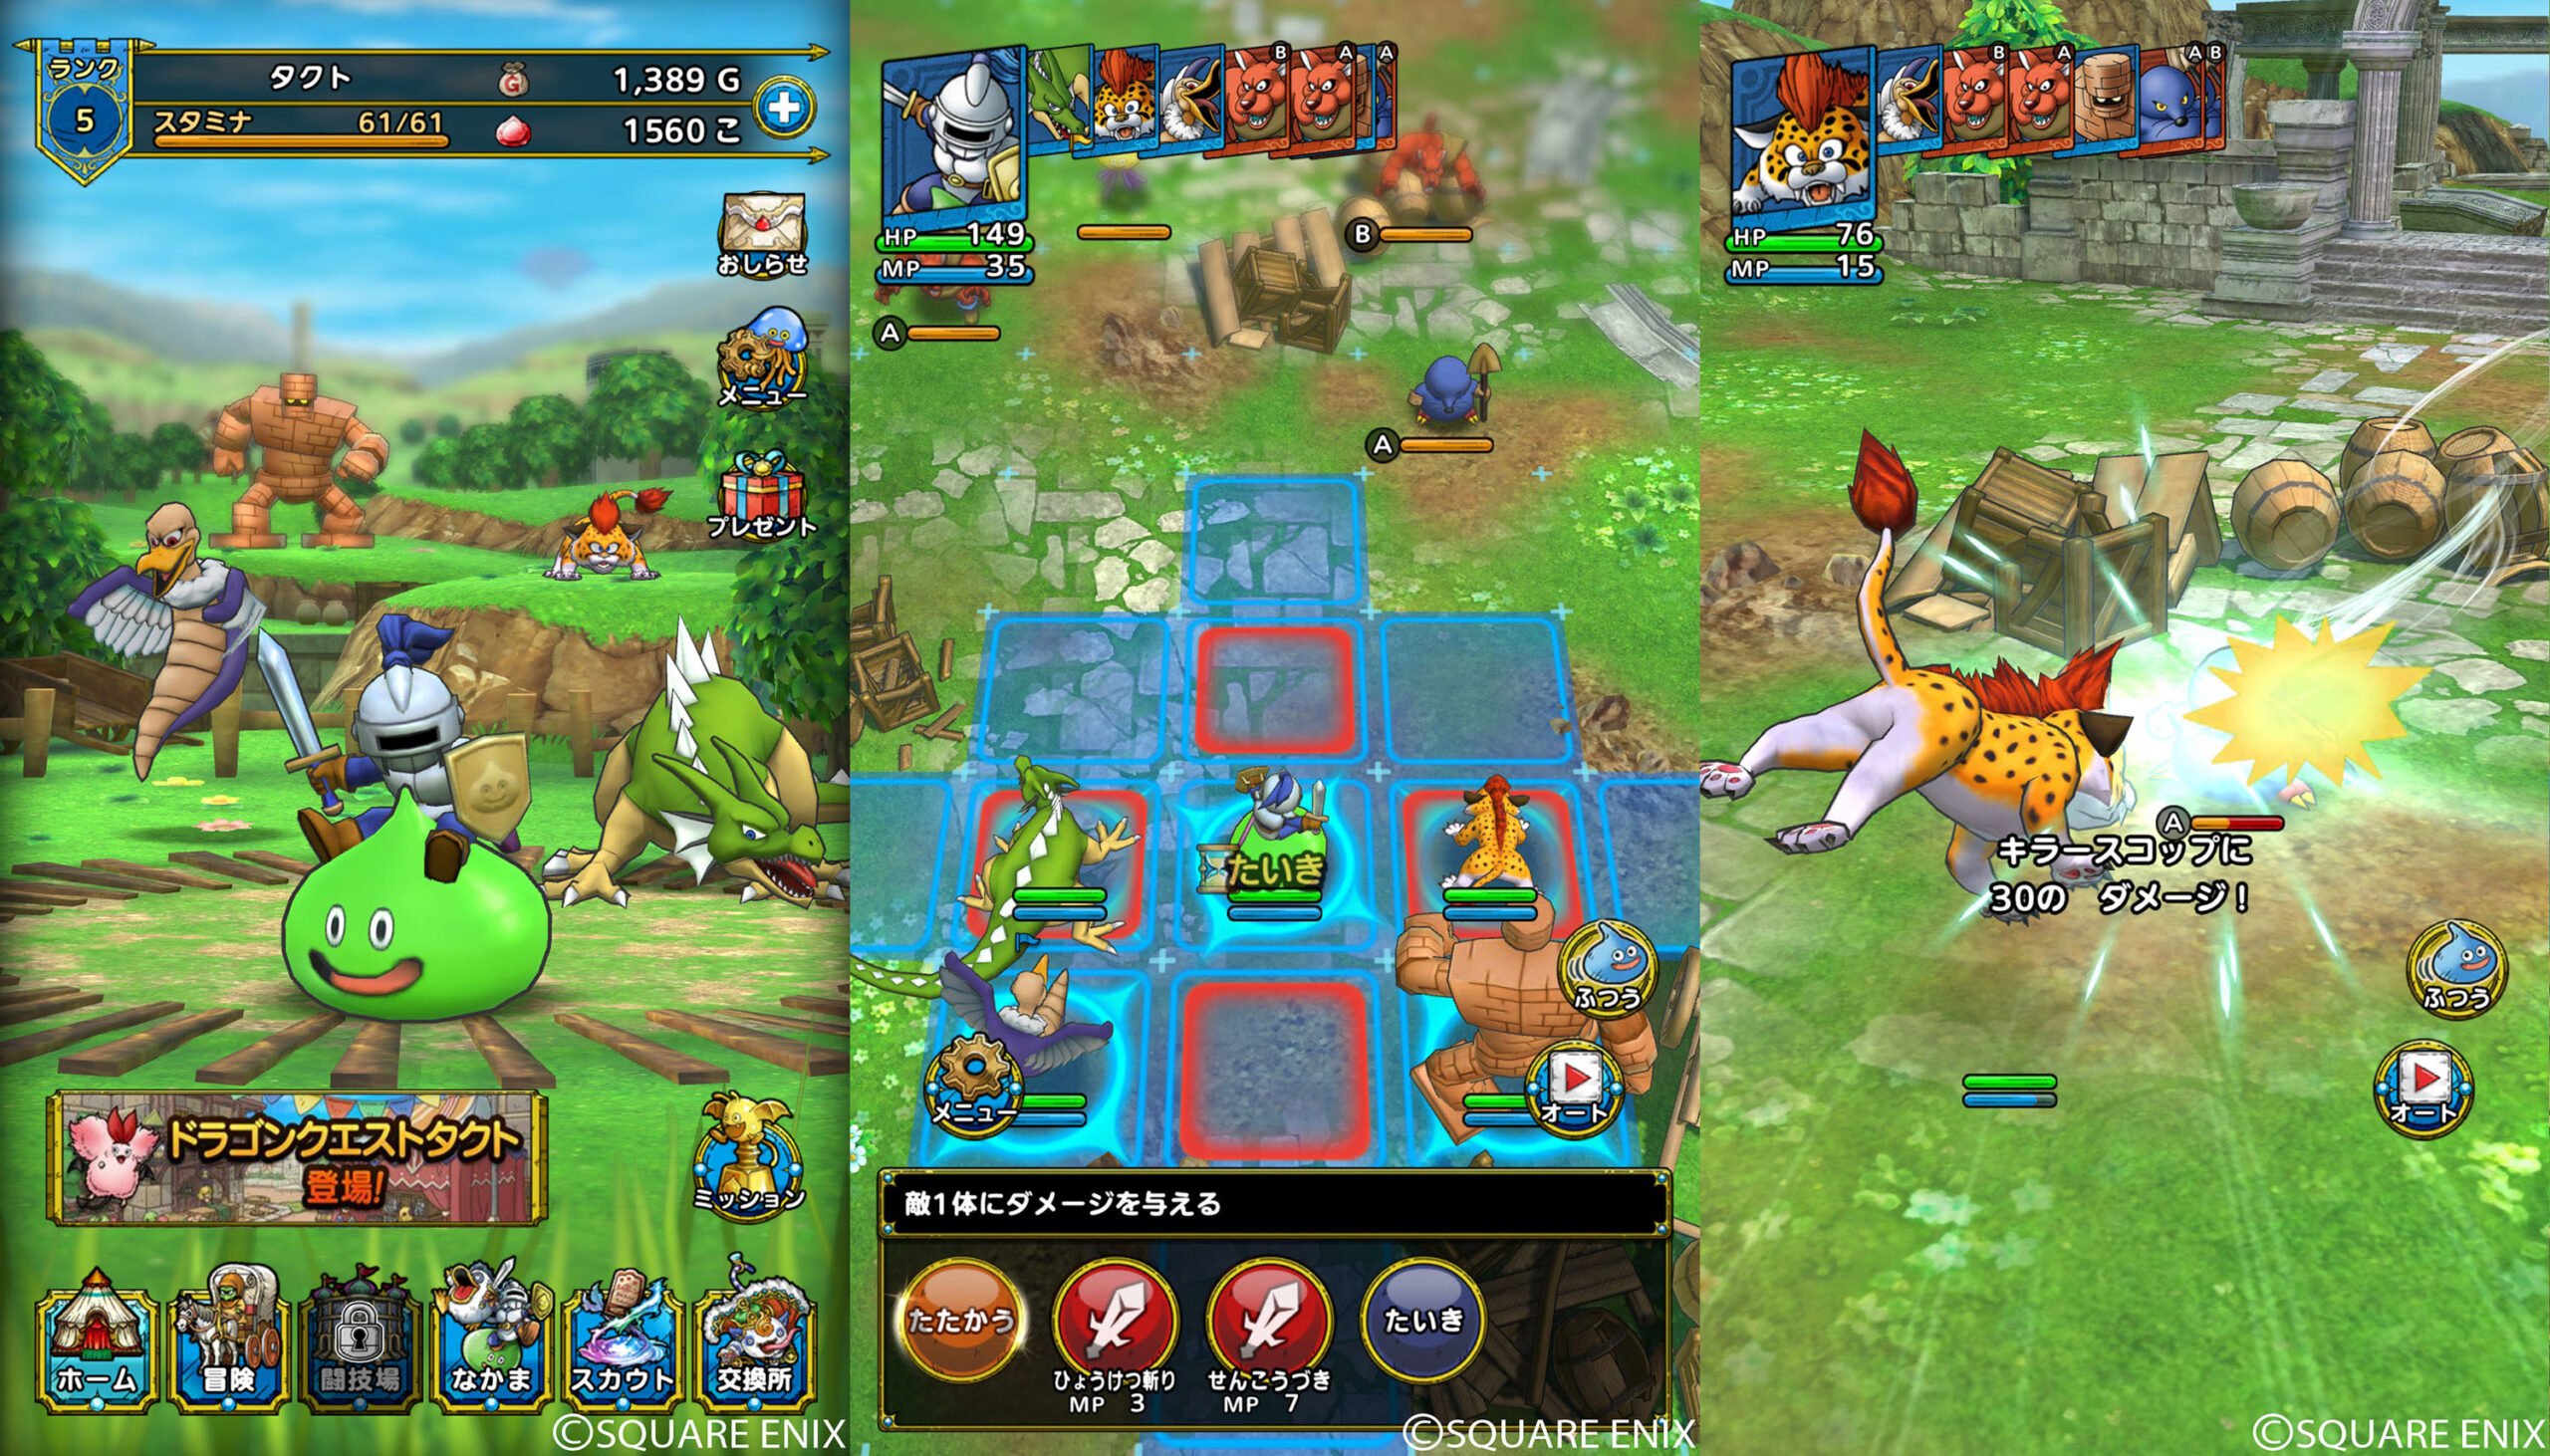 Play Genesis Augmented Reality Games. Dragon Quest Tact gatcha machine gameplay with capsule toys and a green hill in the background